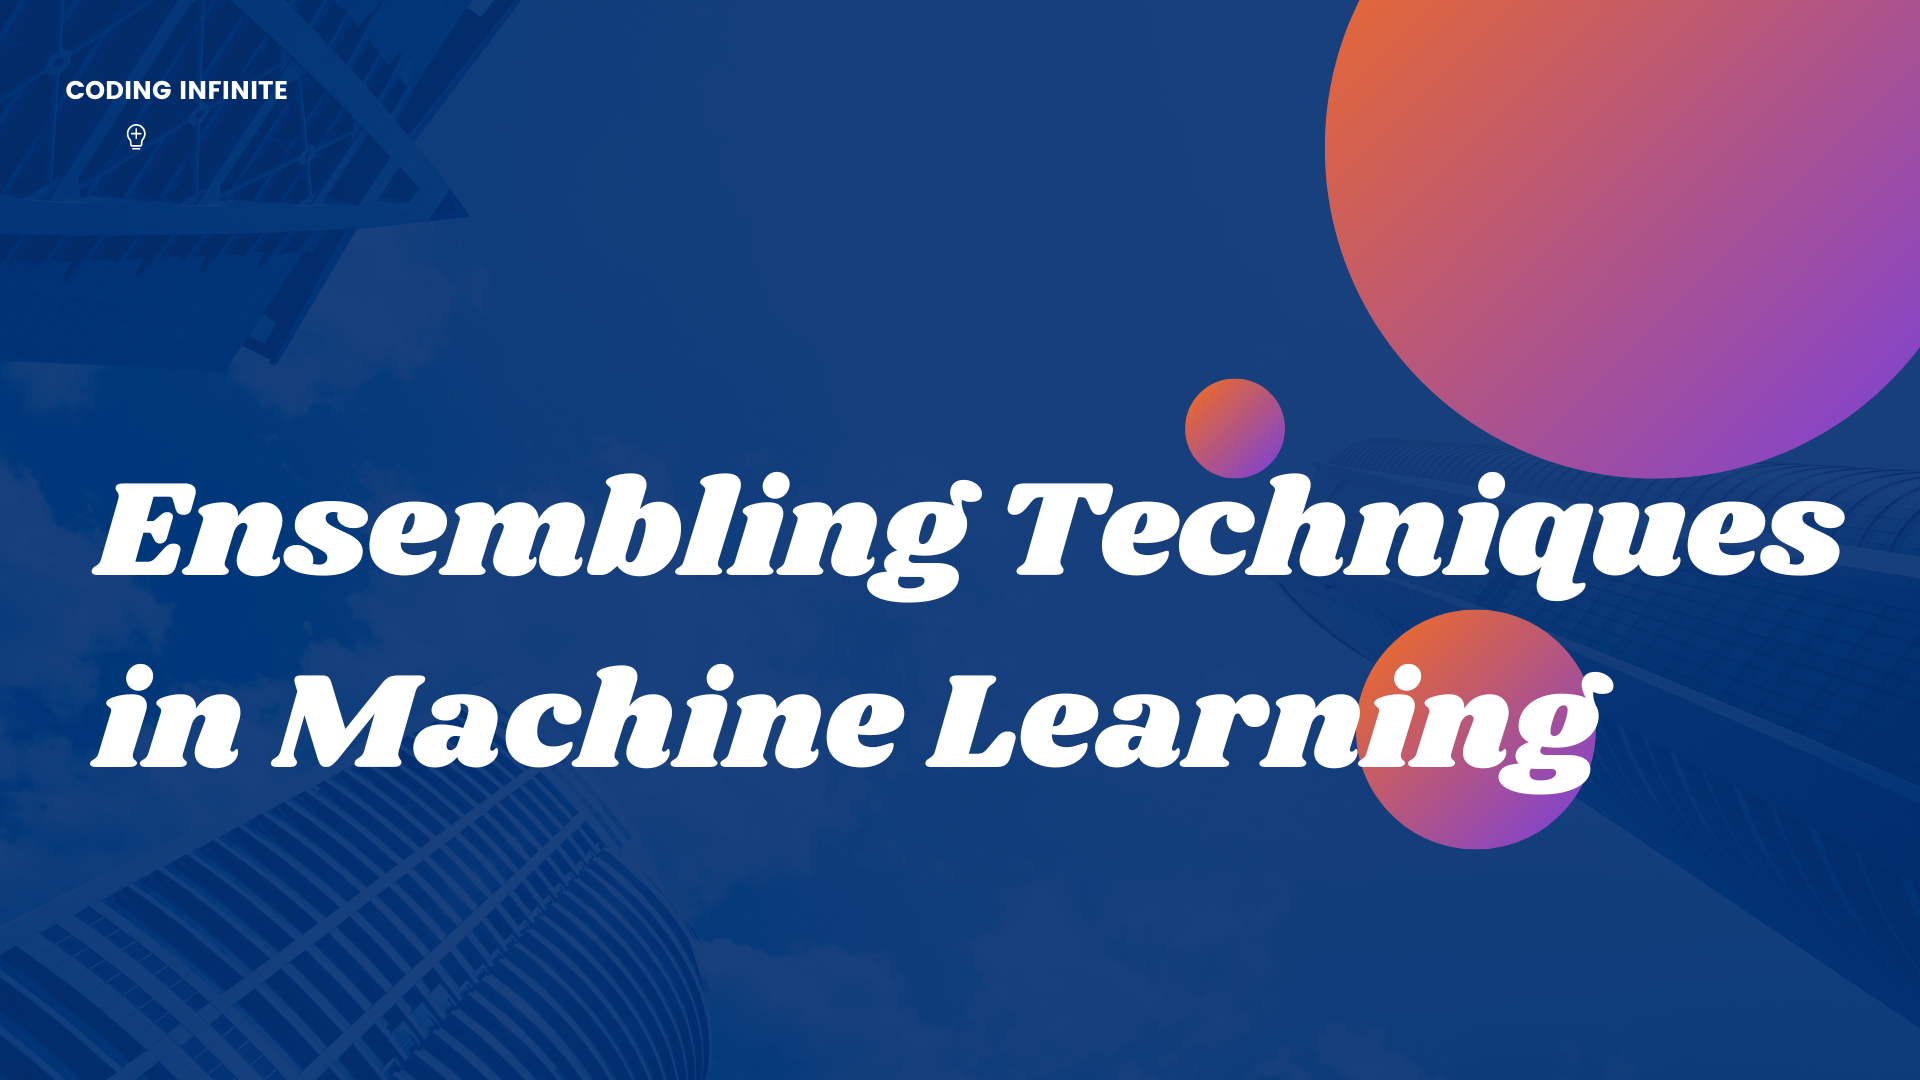 Ensembling Techniques in Machine Learning